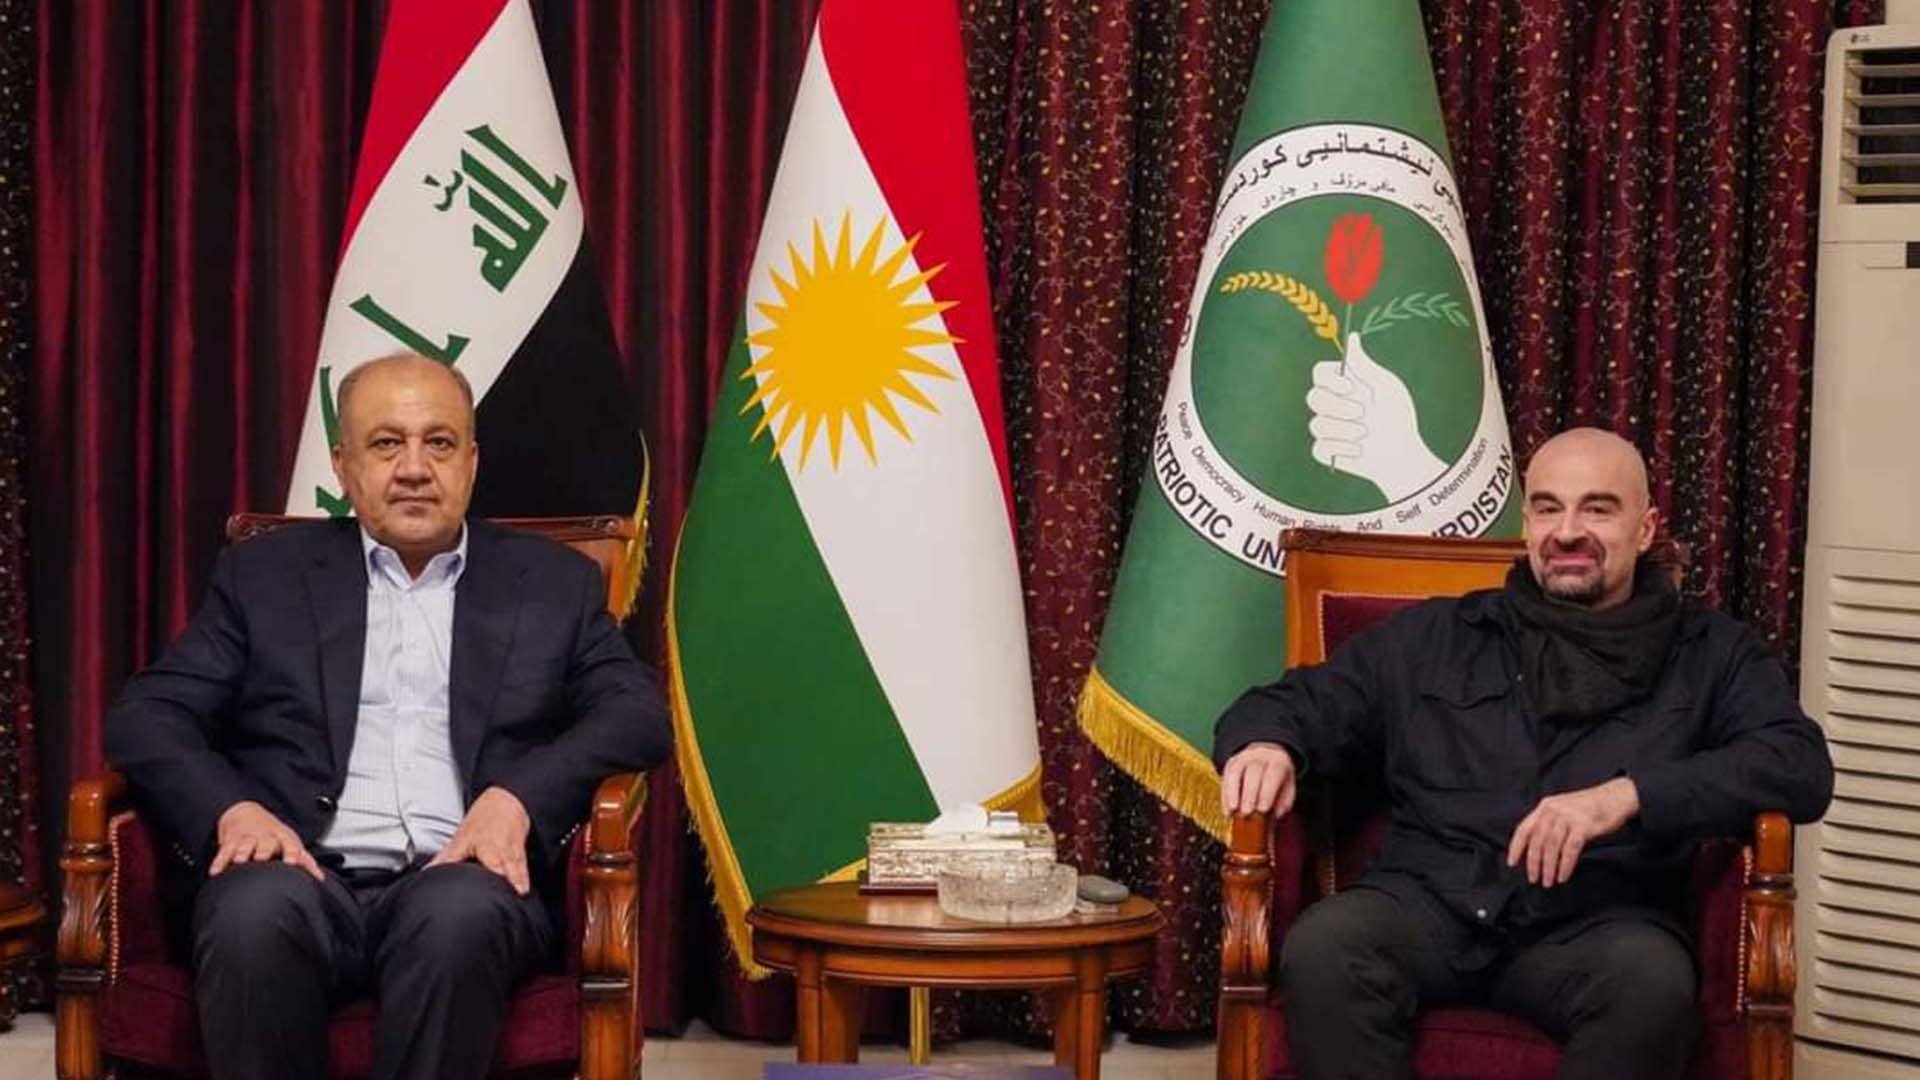 The meeting of the President of the PUK and Iraqi Defense Minister in Baghdad.